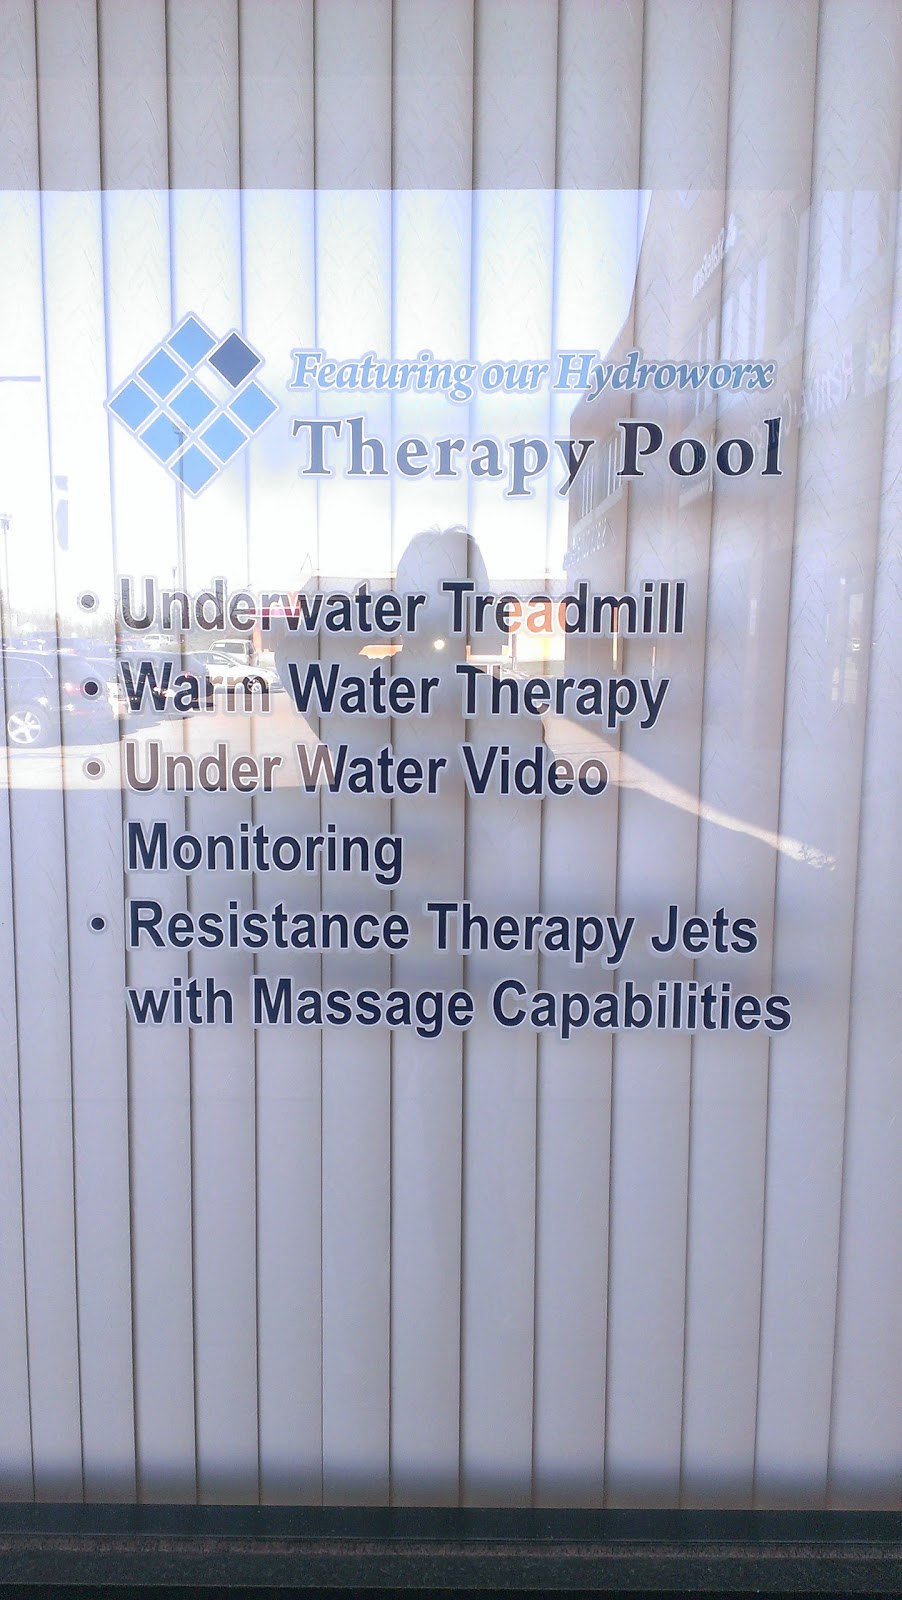 Angeline Physical & Aquatic Therapy | 5914 Wolfpen Pleasant Hill Rd suite d, Milford, OH 45150, USA | Phone: (513) 575-7878